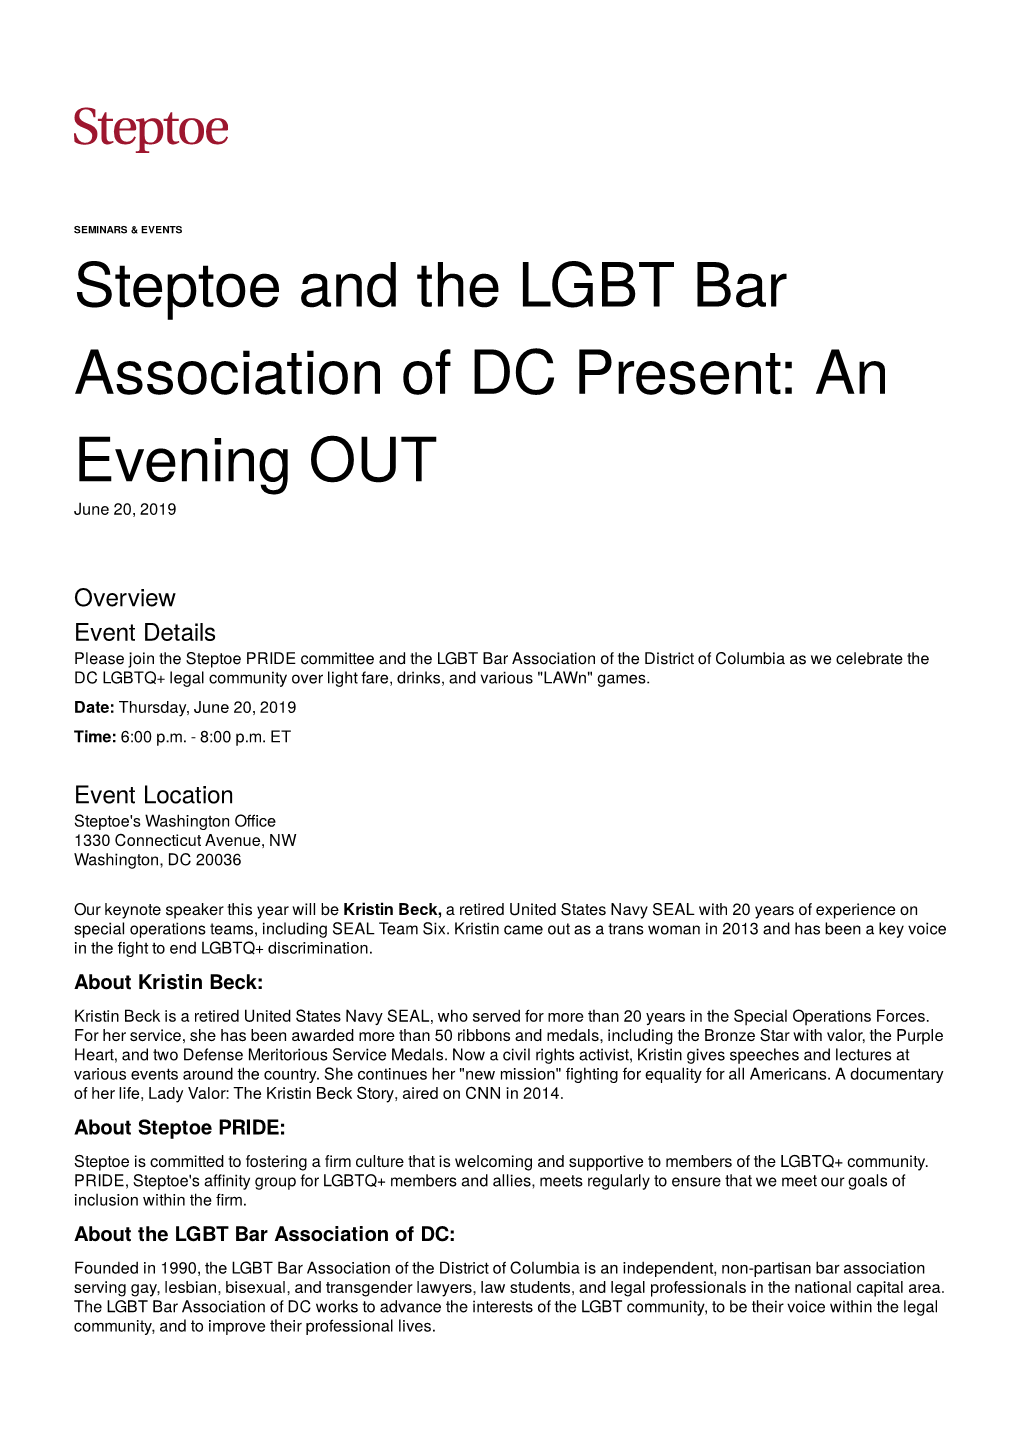 Steptoe and the LGBT Bar Association of DC Present: an Evening OUT